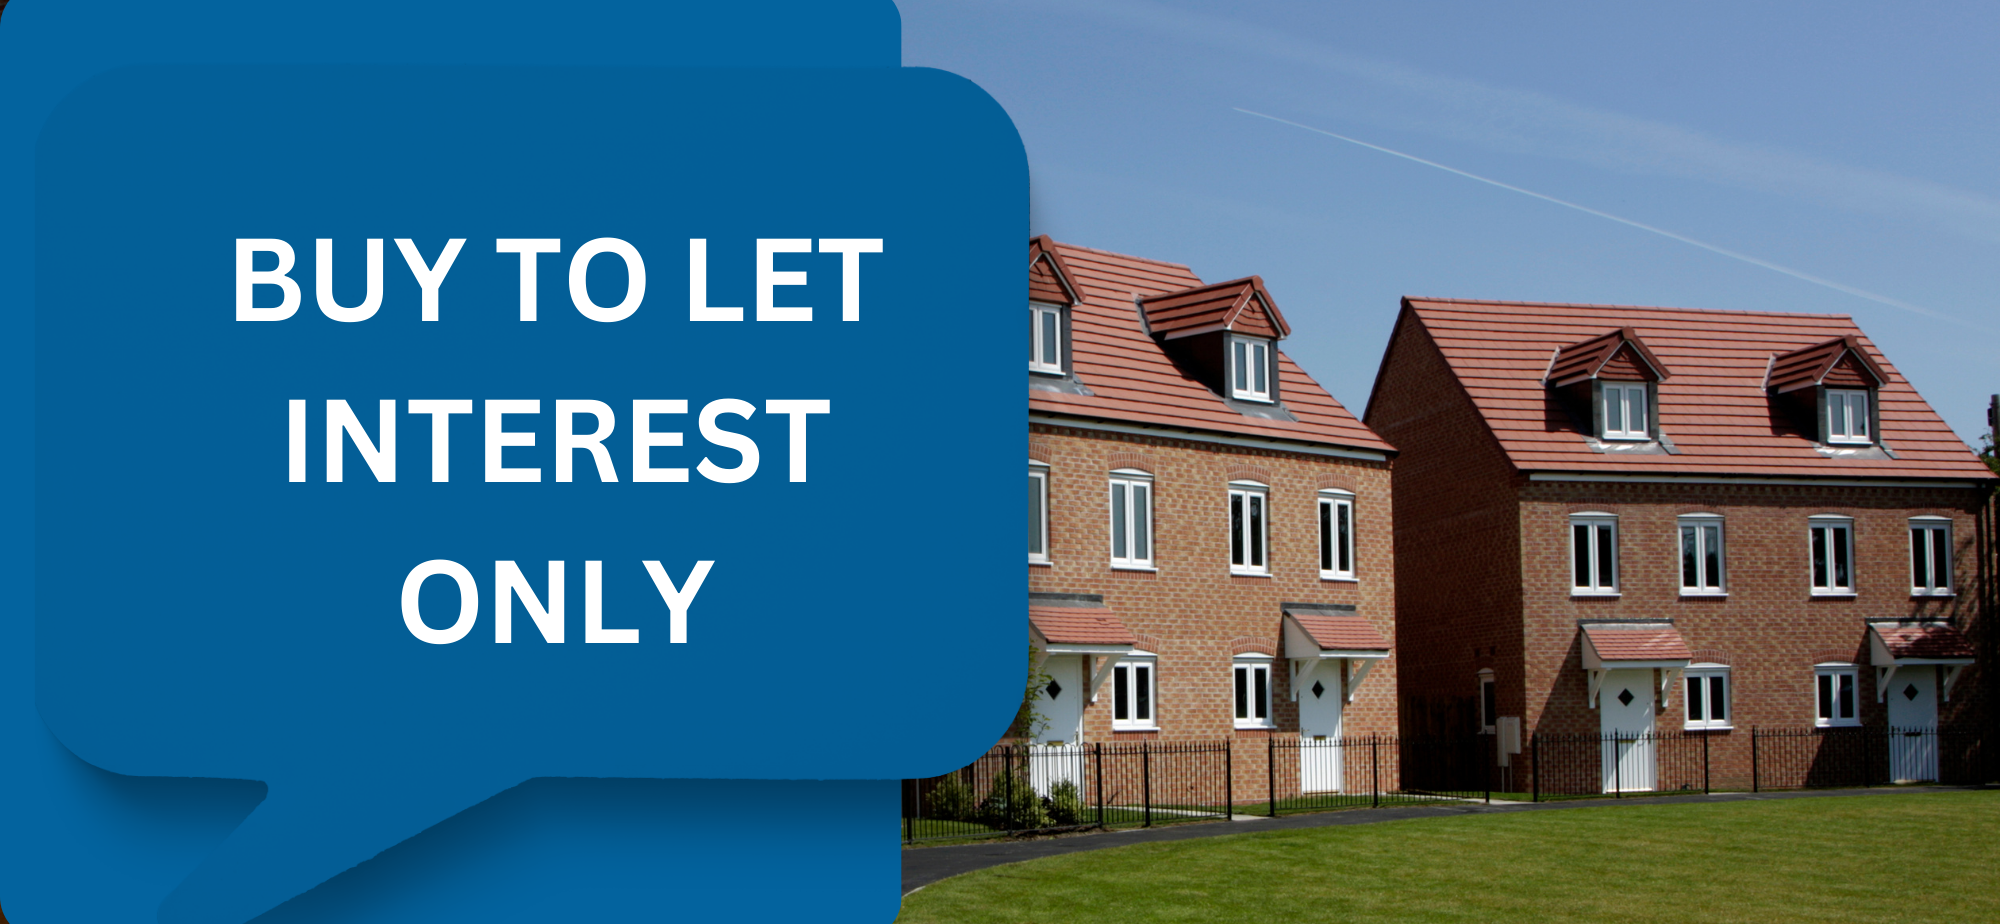 Buy to Let interest Only Mortgage